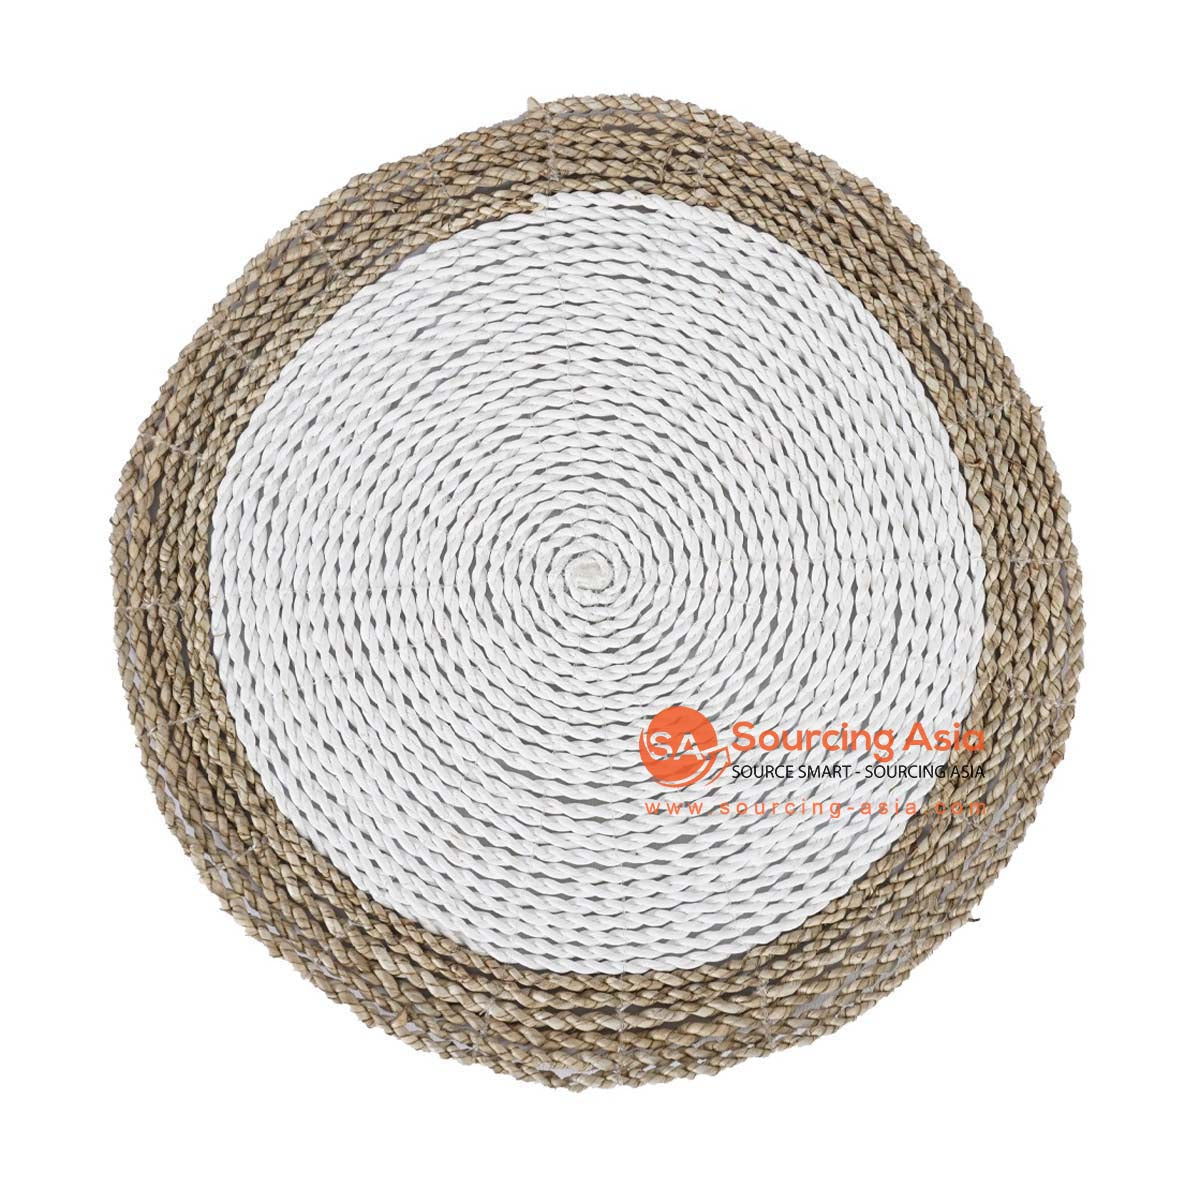 HBSC567-1 NATURAL AND WHITE PANDANUS ROUND PLACEMAT